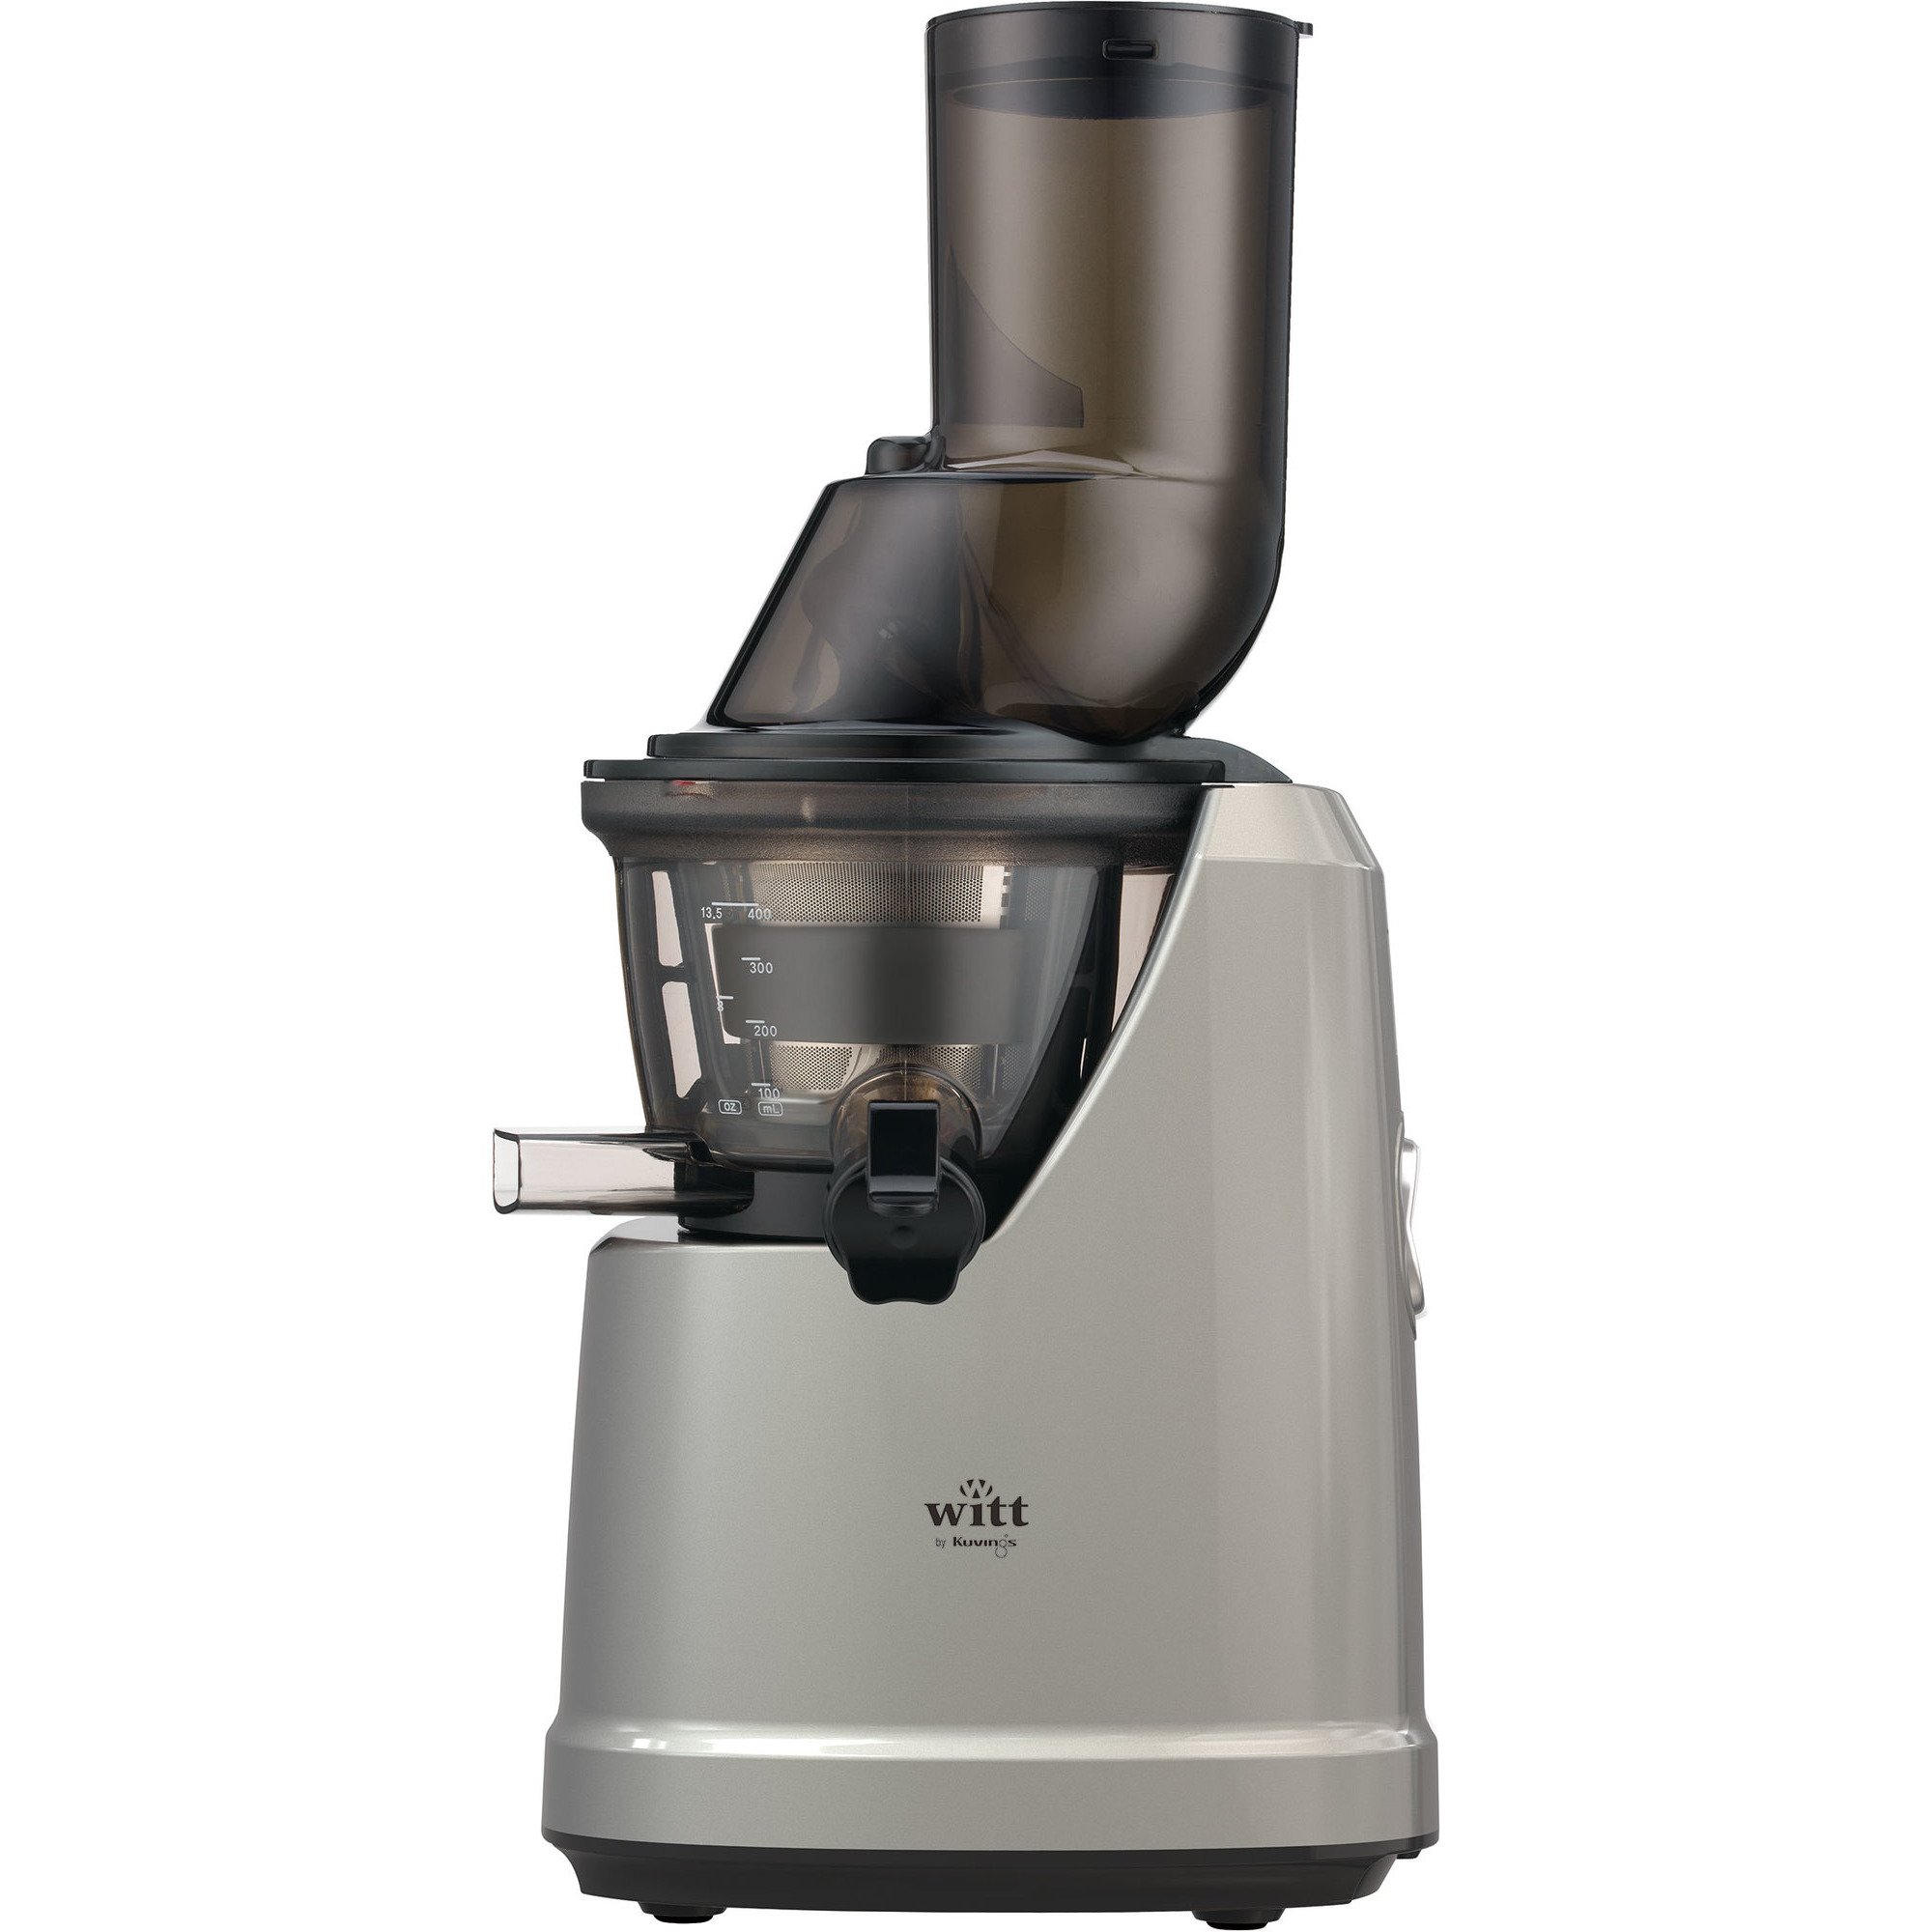 Witt by Kuvings B6200S slow juicer